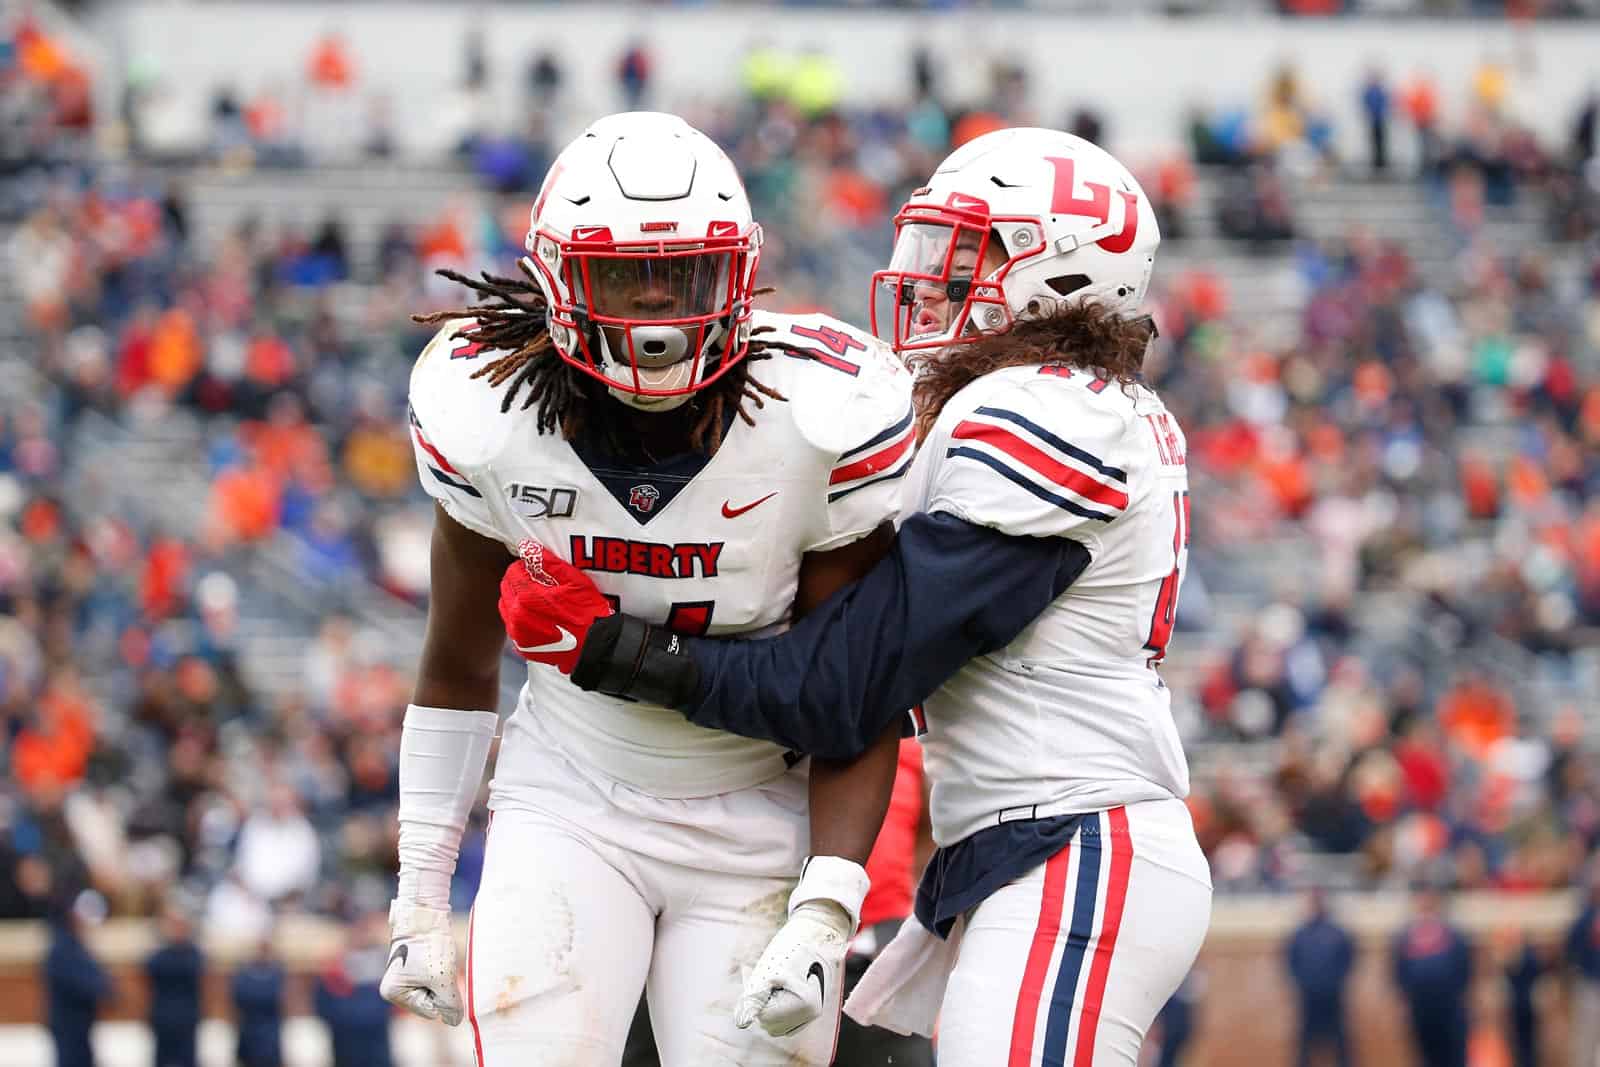 Liberty University Football Schedule 2022 Liberty Adds Uconn To 2022 Football Schedule